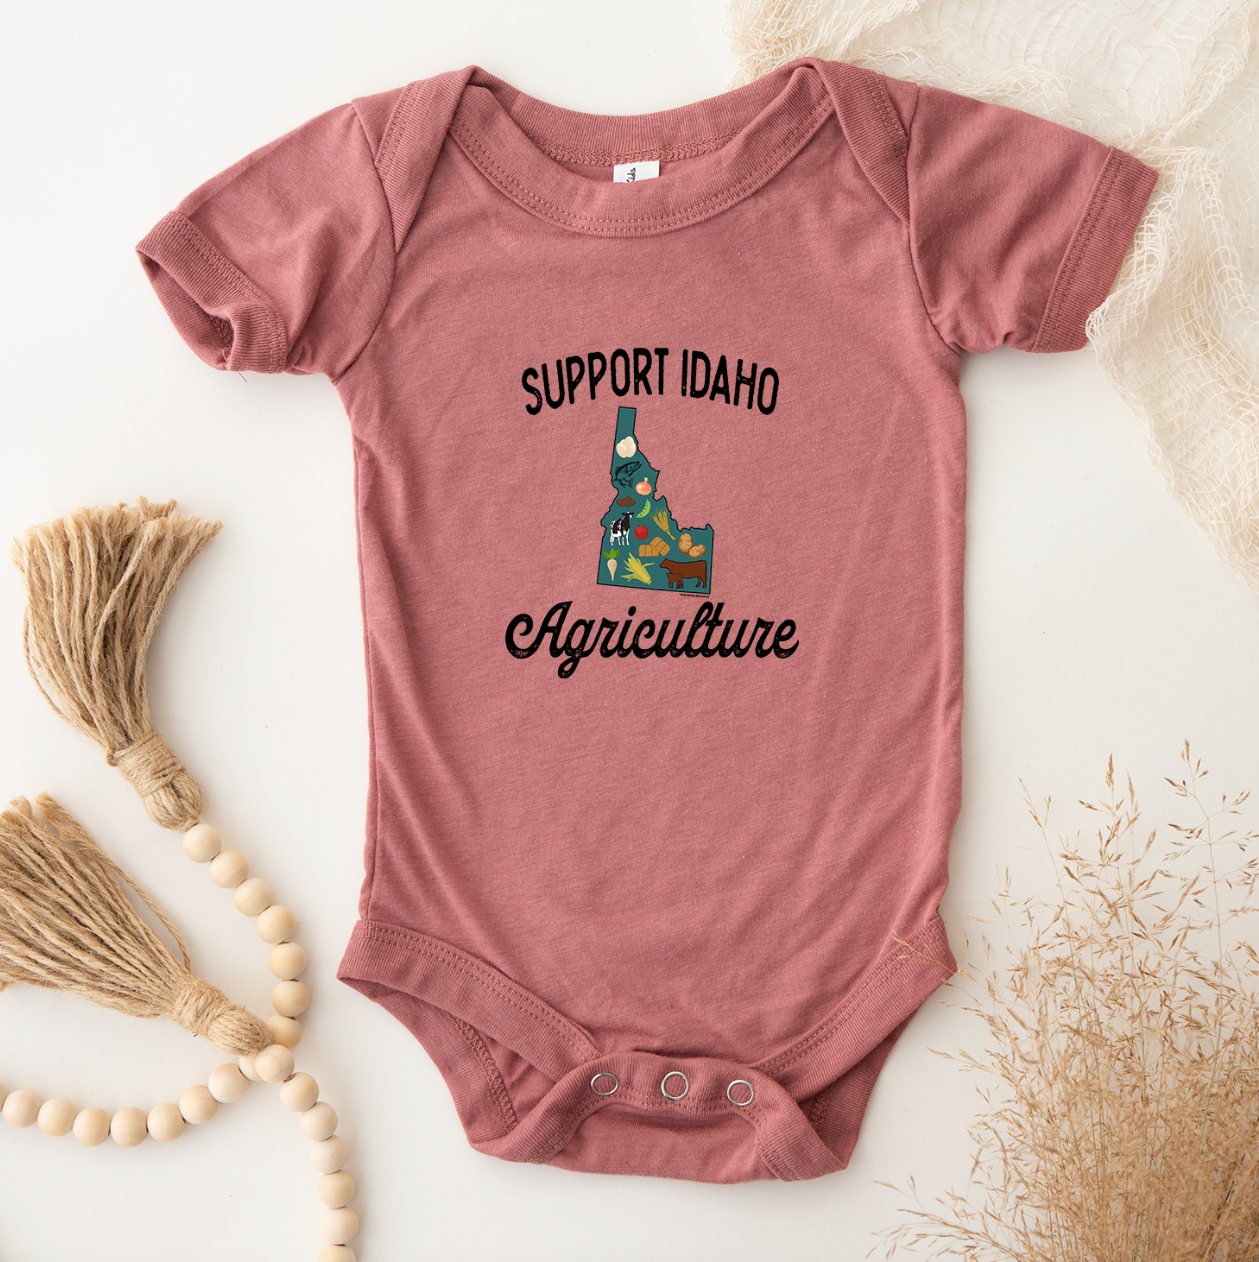 Support Idaho Agriculture One Piece/T-Shirt (Newborn - Youth XL) - Multiple Colors!